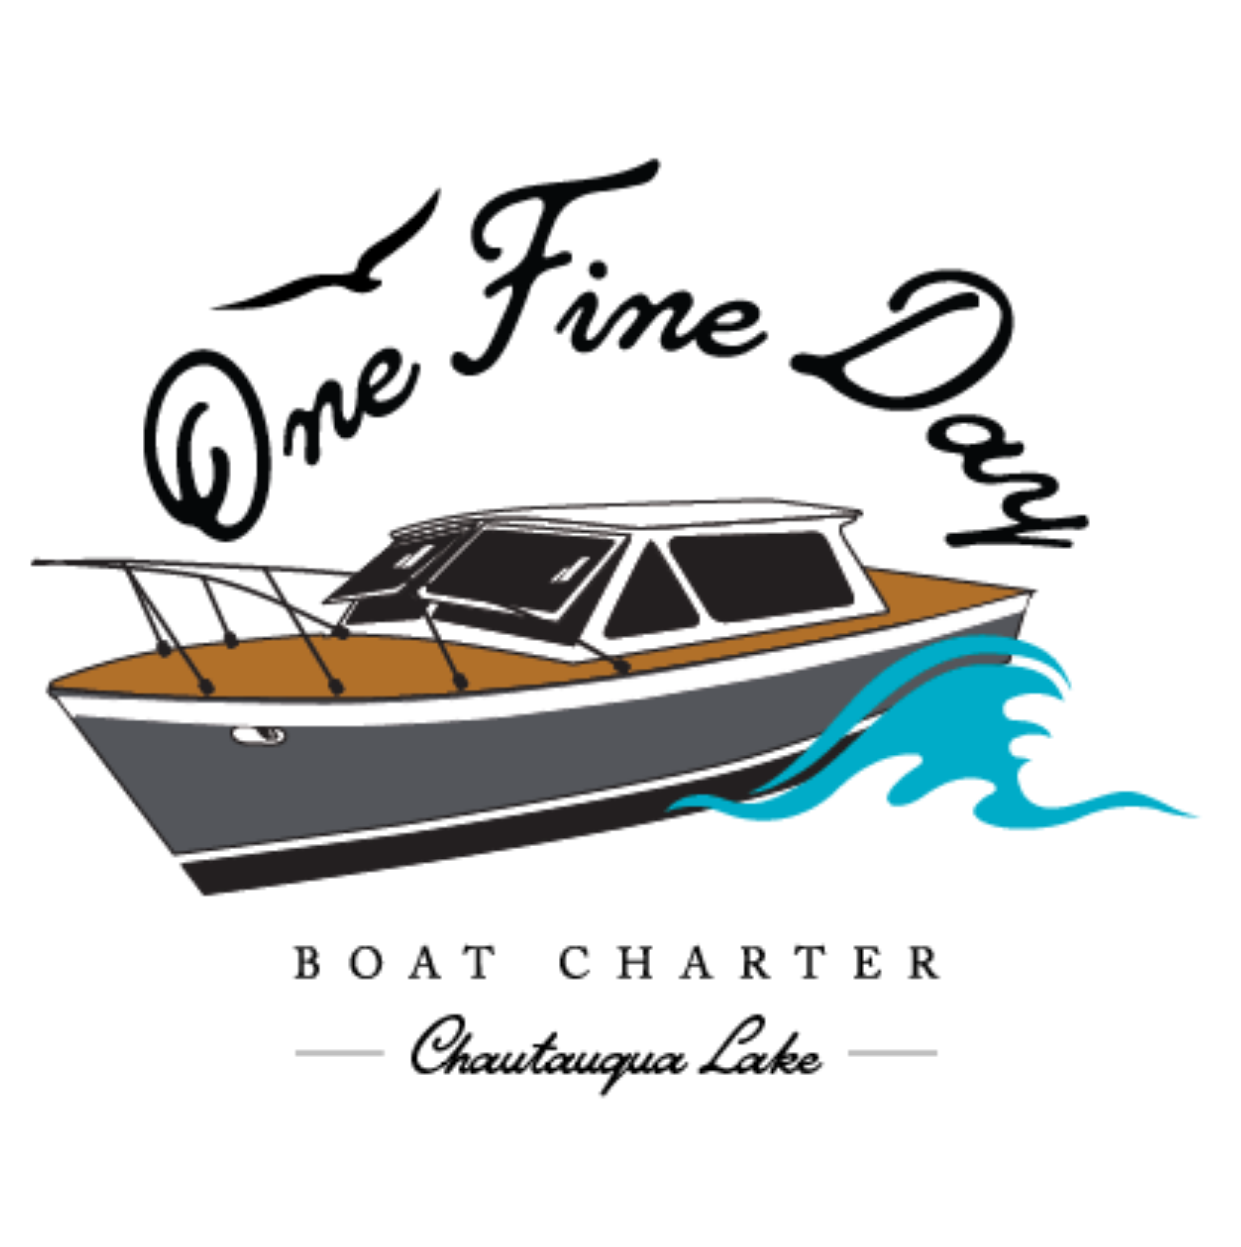 One Fine Day Boat Charter